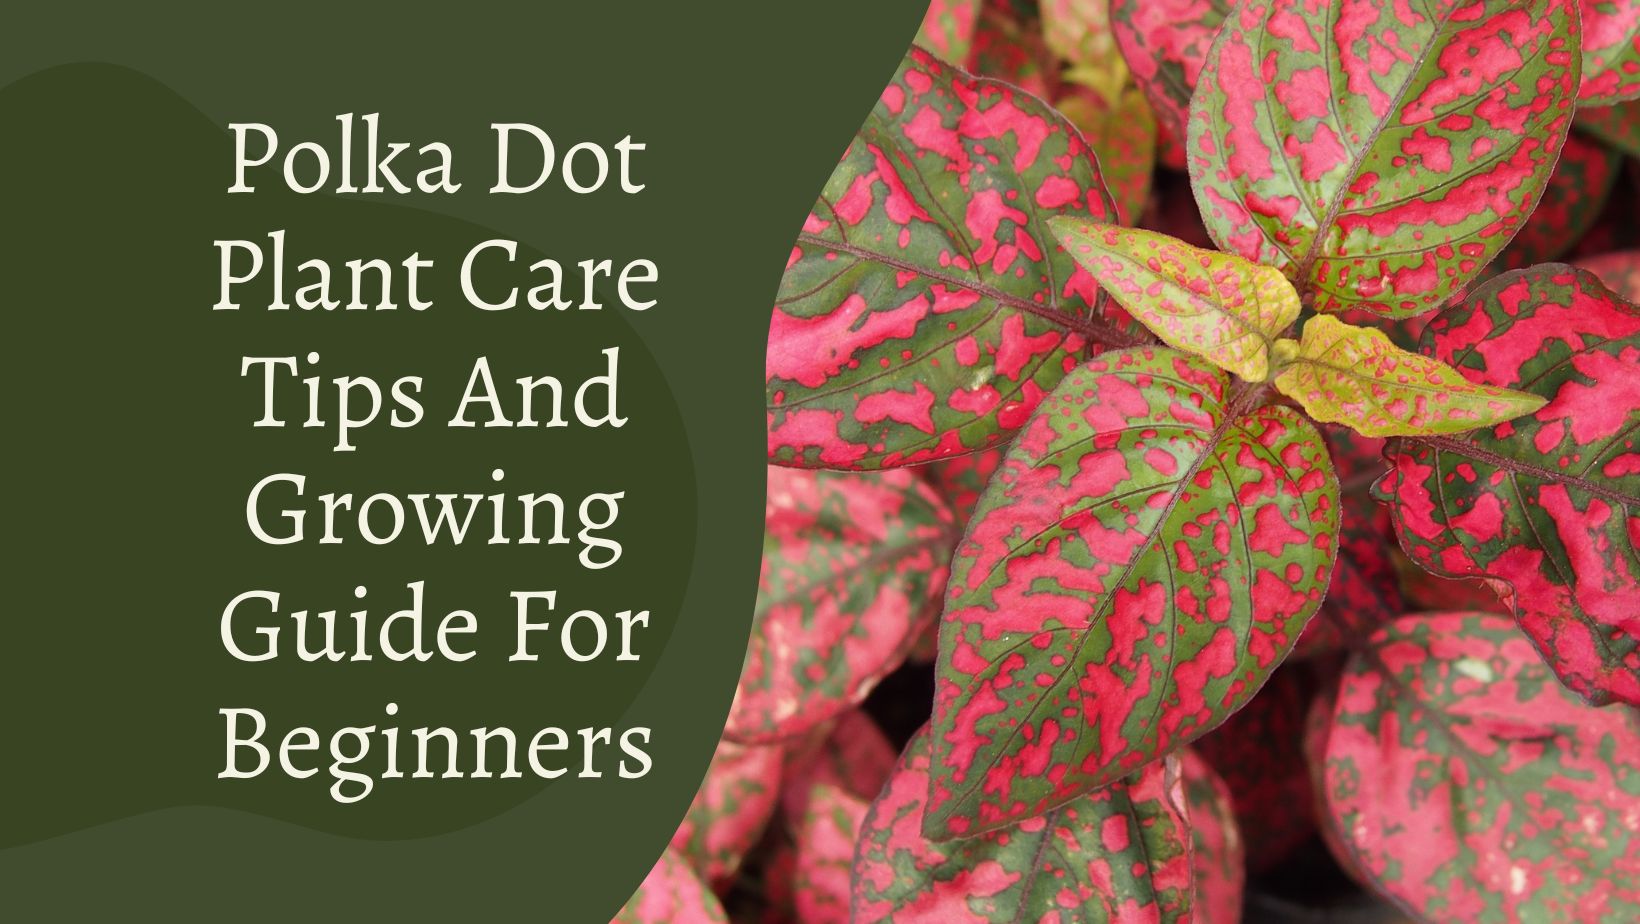 Polka Dot Plant Care Tips And Growing Guide For Beginners